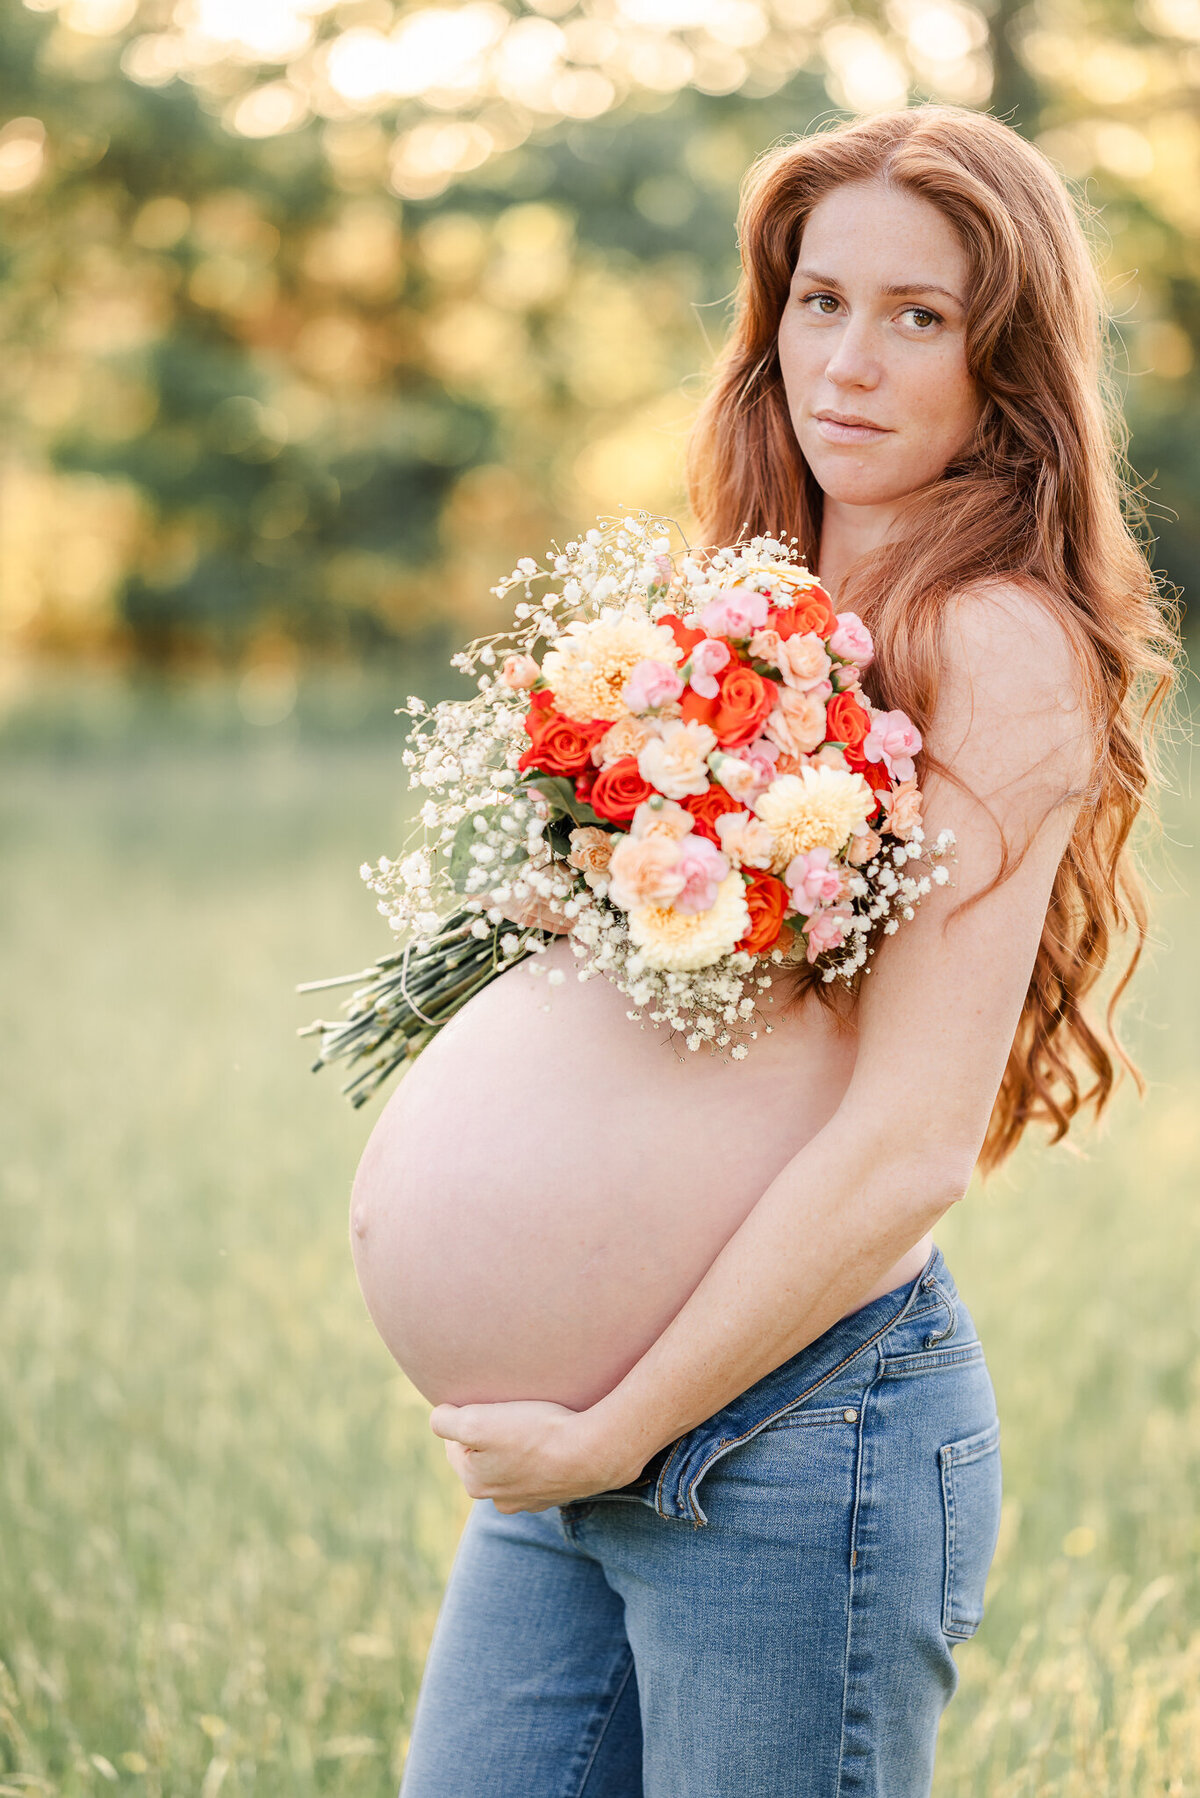 A mama-to-be wearing jeans, holds a  bouquet of flowers to create a top during her maternity session at Bells Mill Park in Chesapeake, VA.